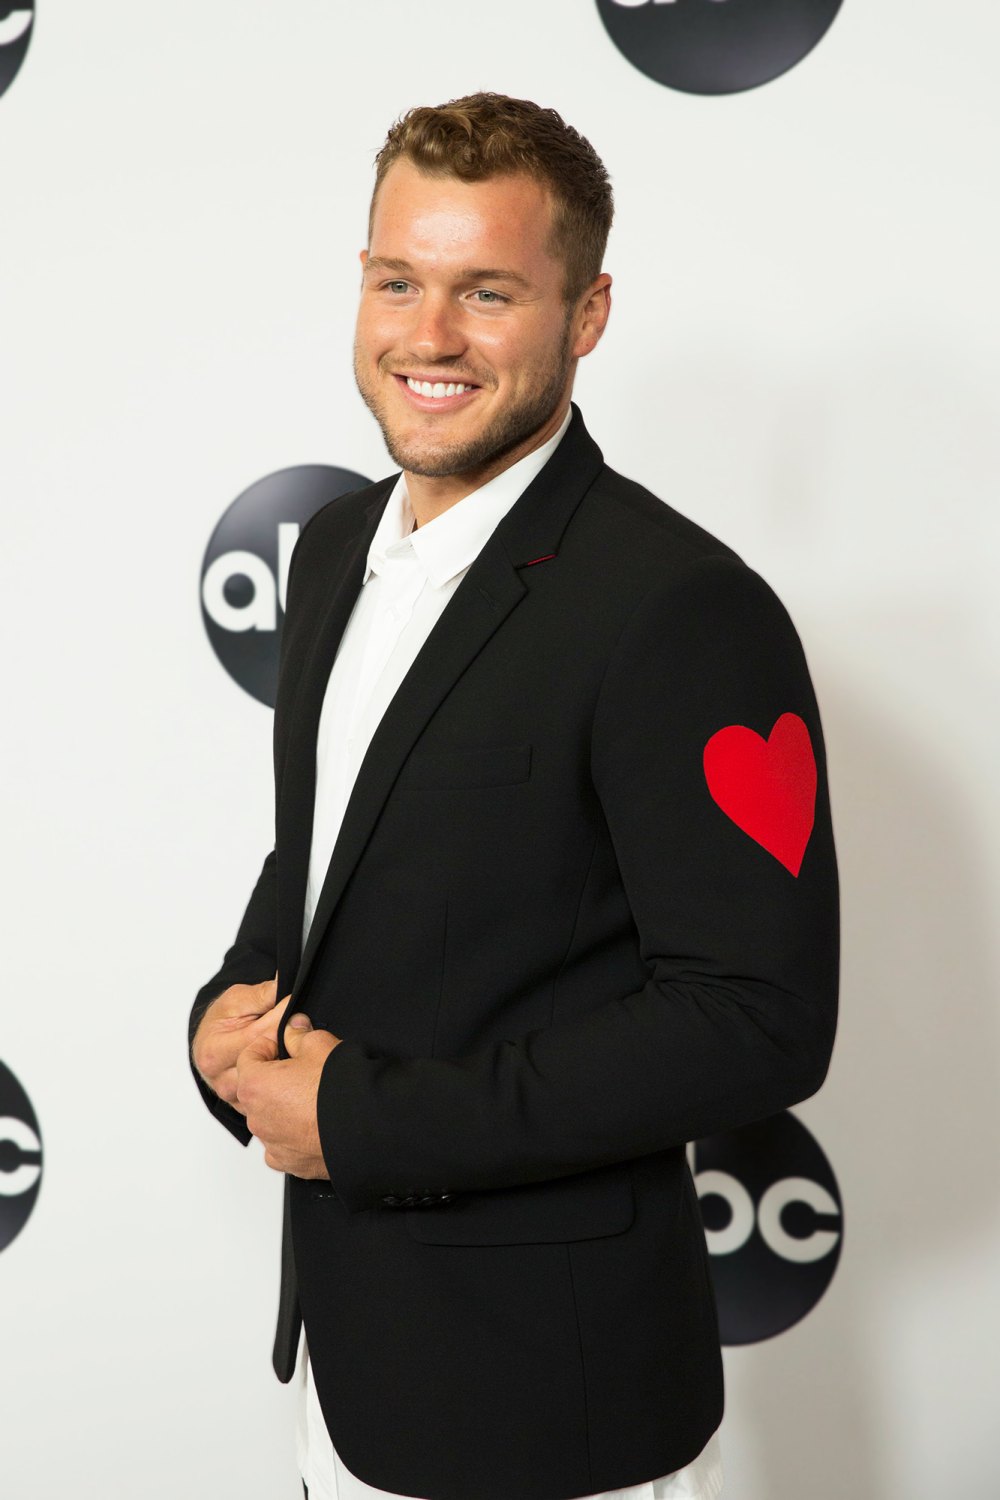 Questions We Have About Colton Underwood’s Season of ‘The Bachelor’